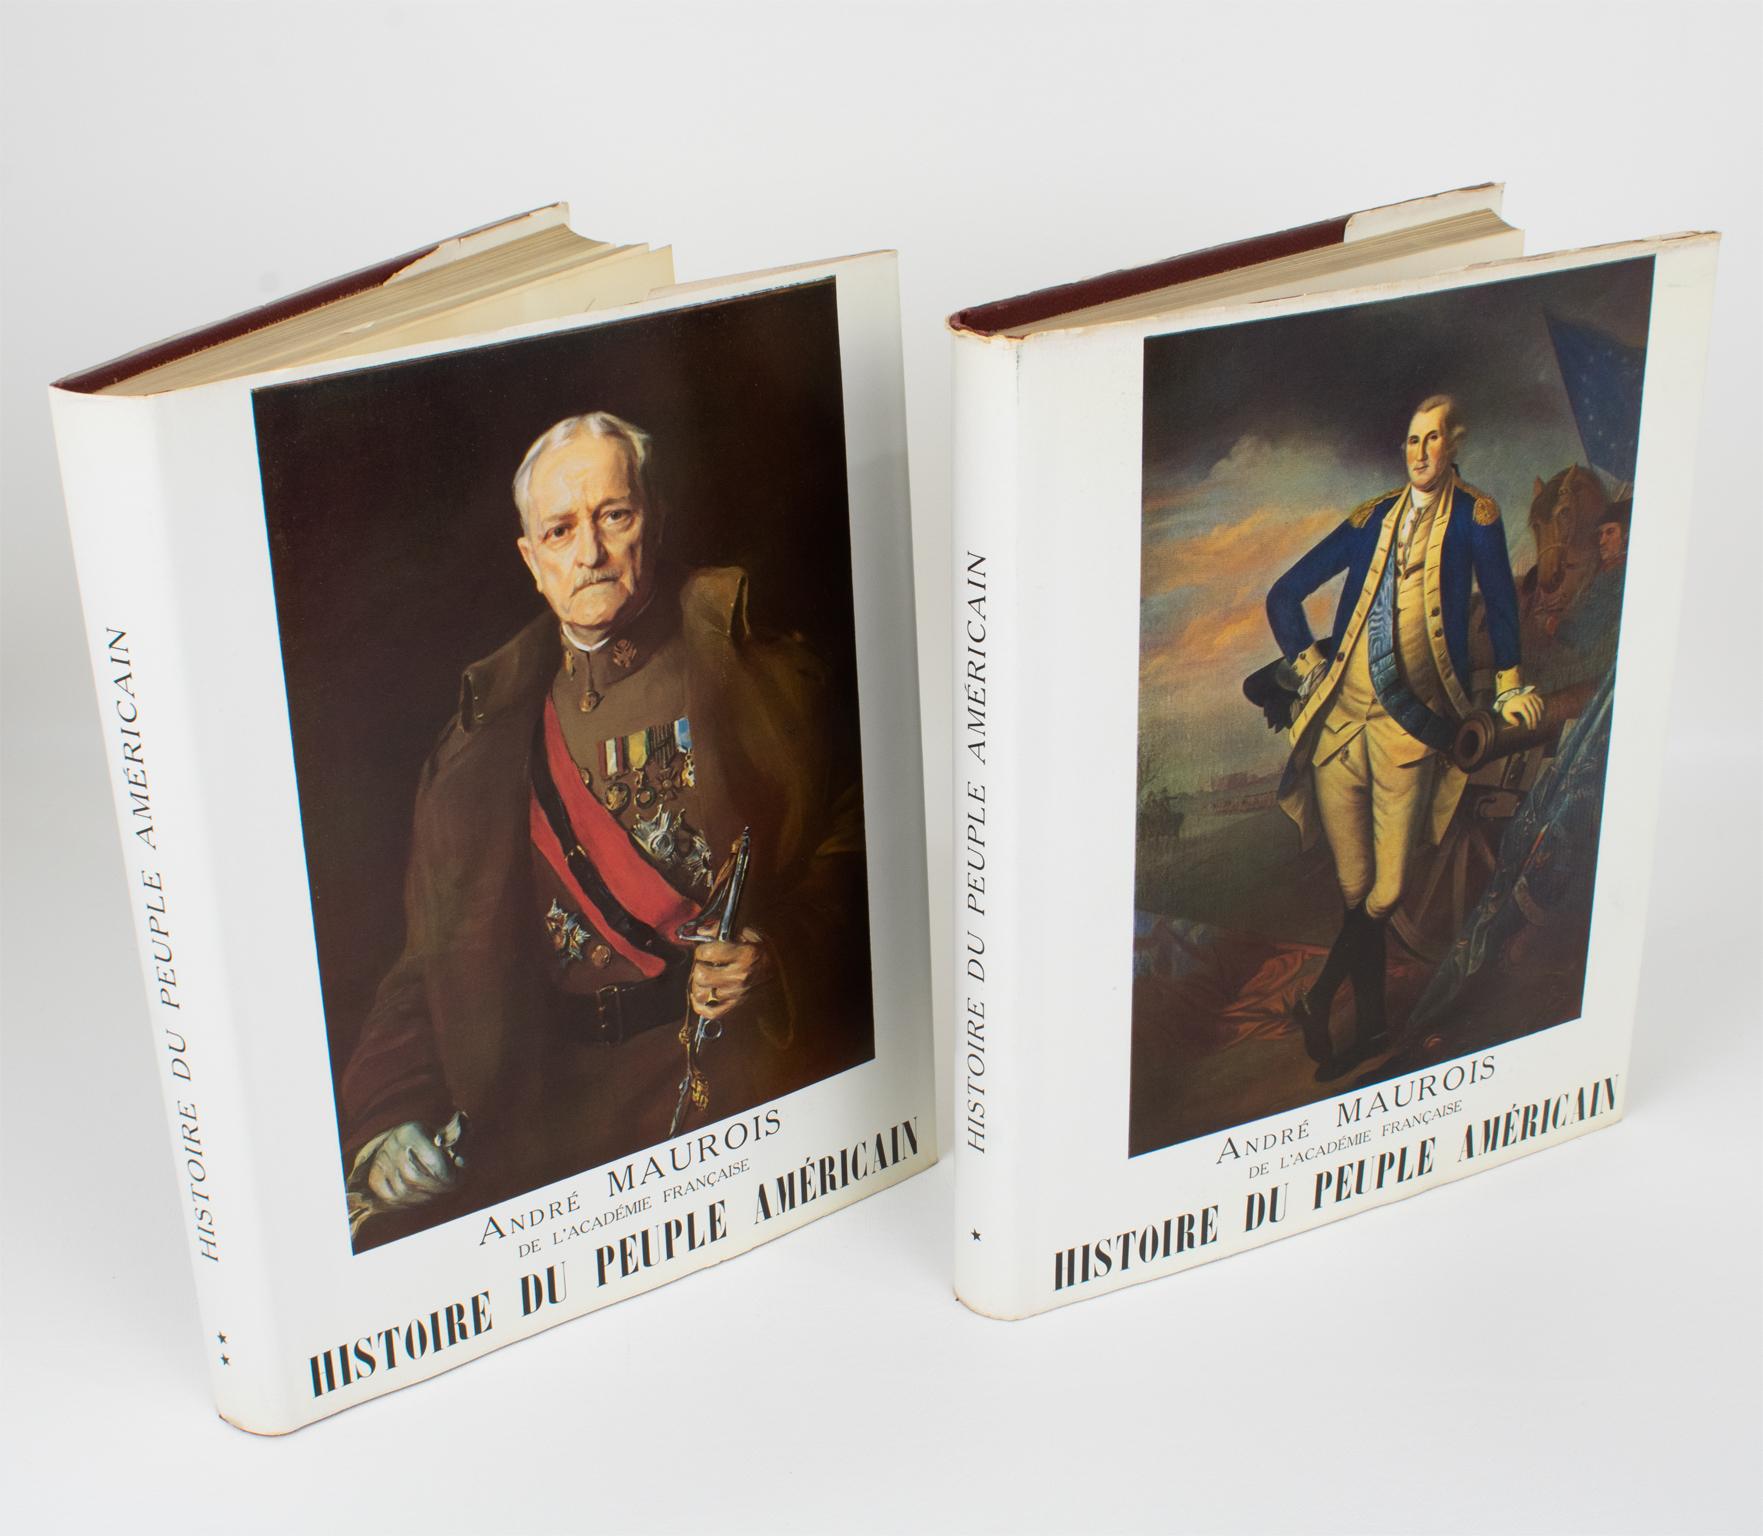 Histoire du Peuple Americain (History of the American People), French book in two volumes by André Maurois from the French Academy, 1955/56.
Volume I: Europe discovers America - At the crossroads - The birth of a nation.
Volume II: Growing Pains -